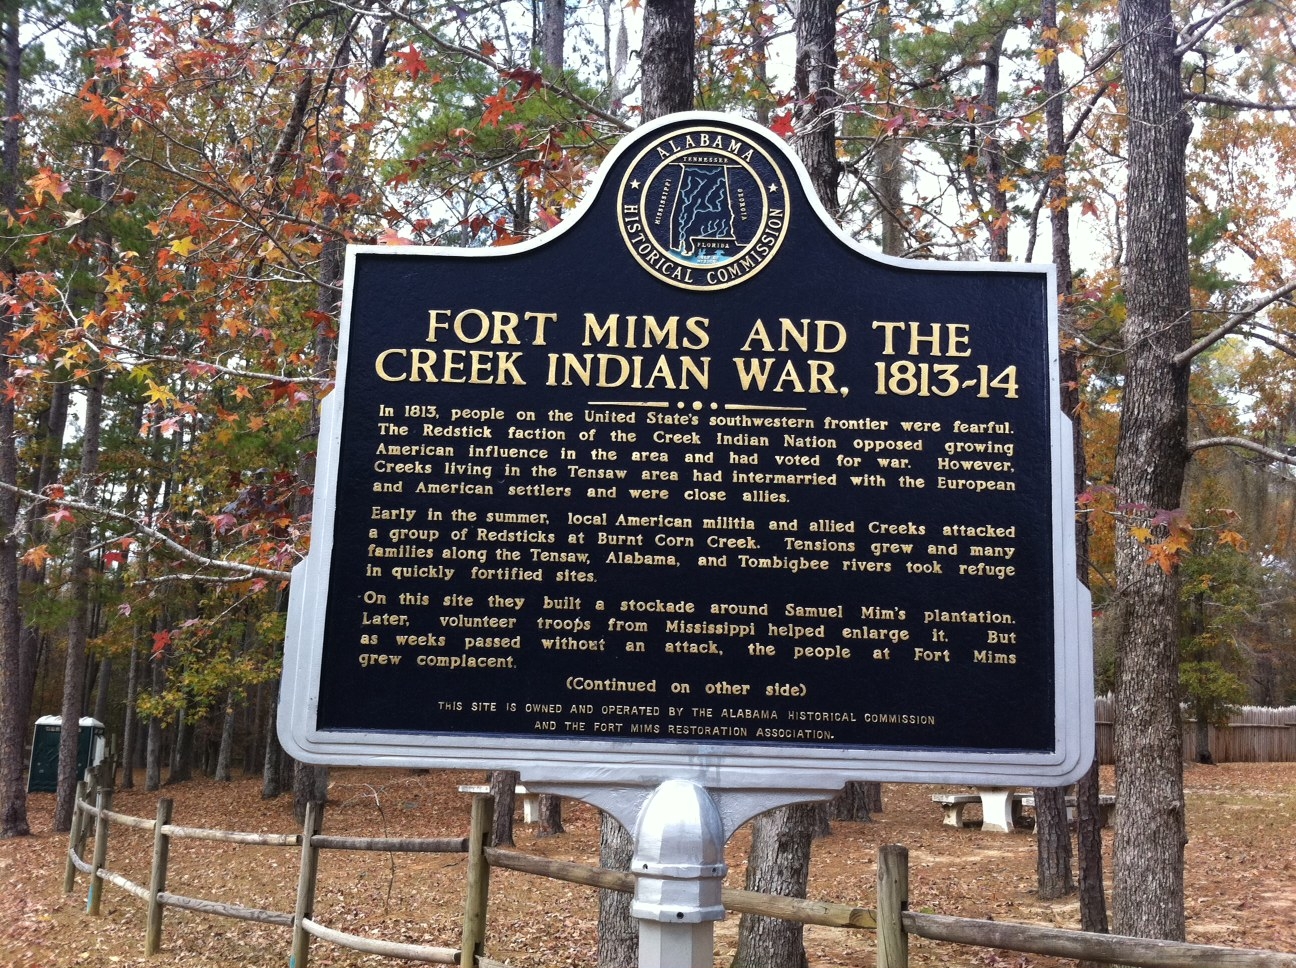 The Fort Mims Historical Marker